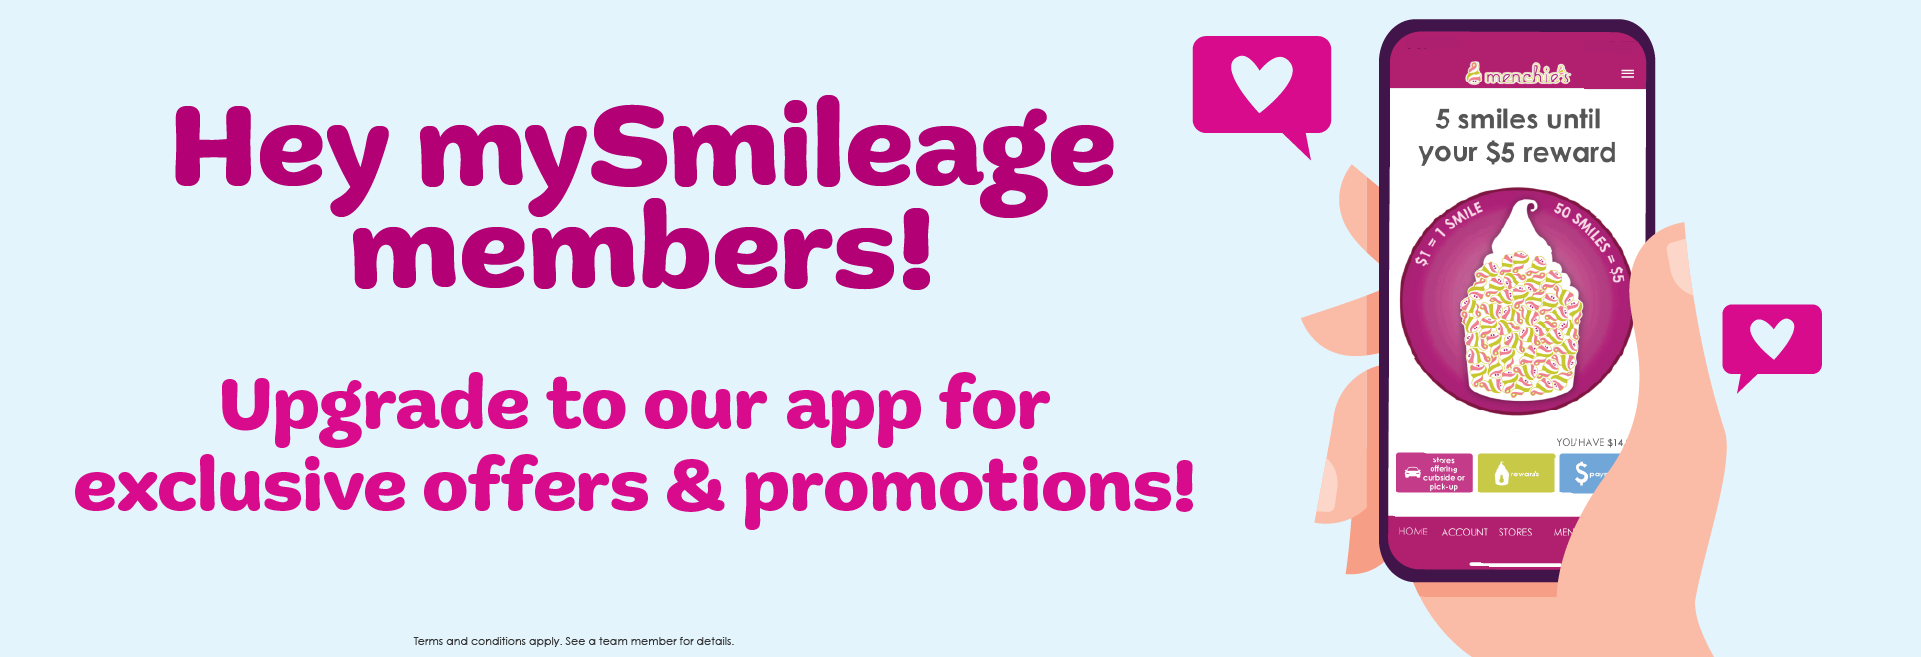 Earn sweet perks with the Menchie’s app!